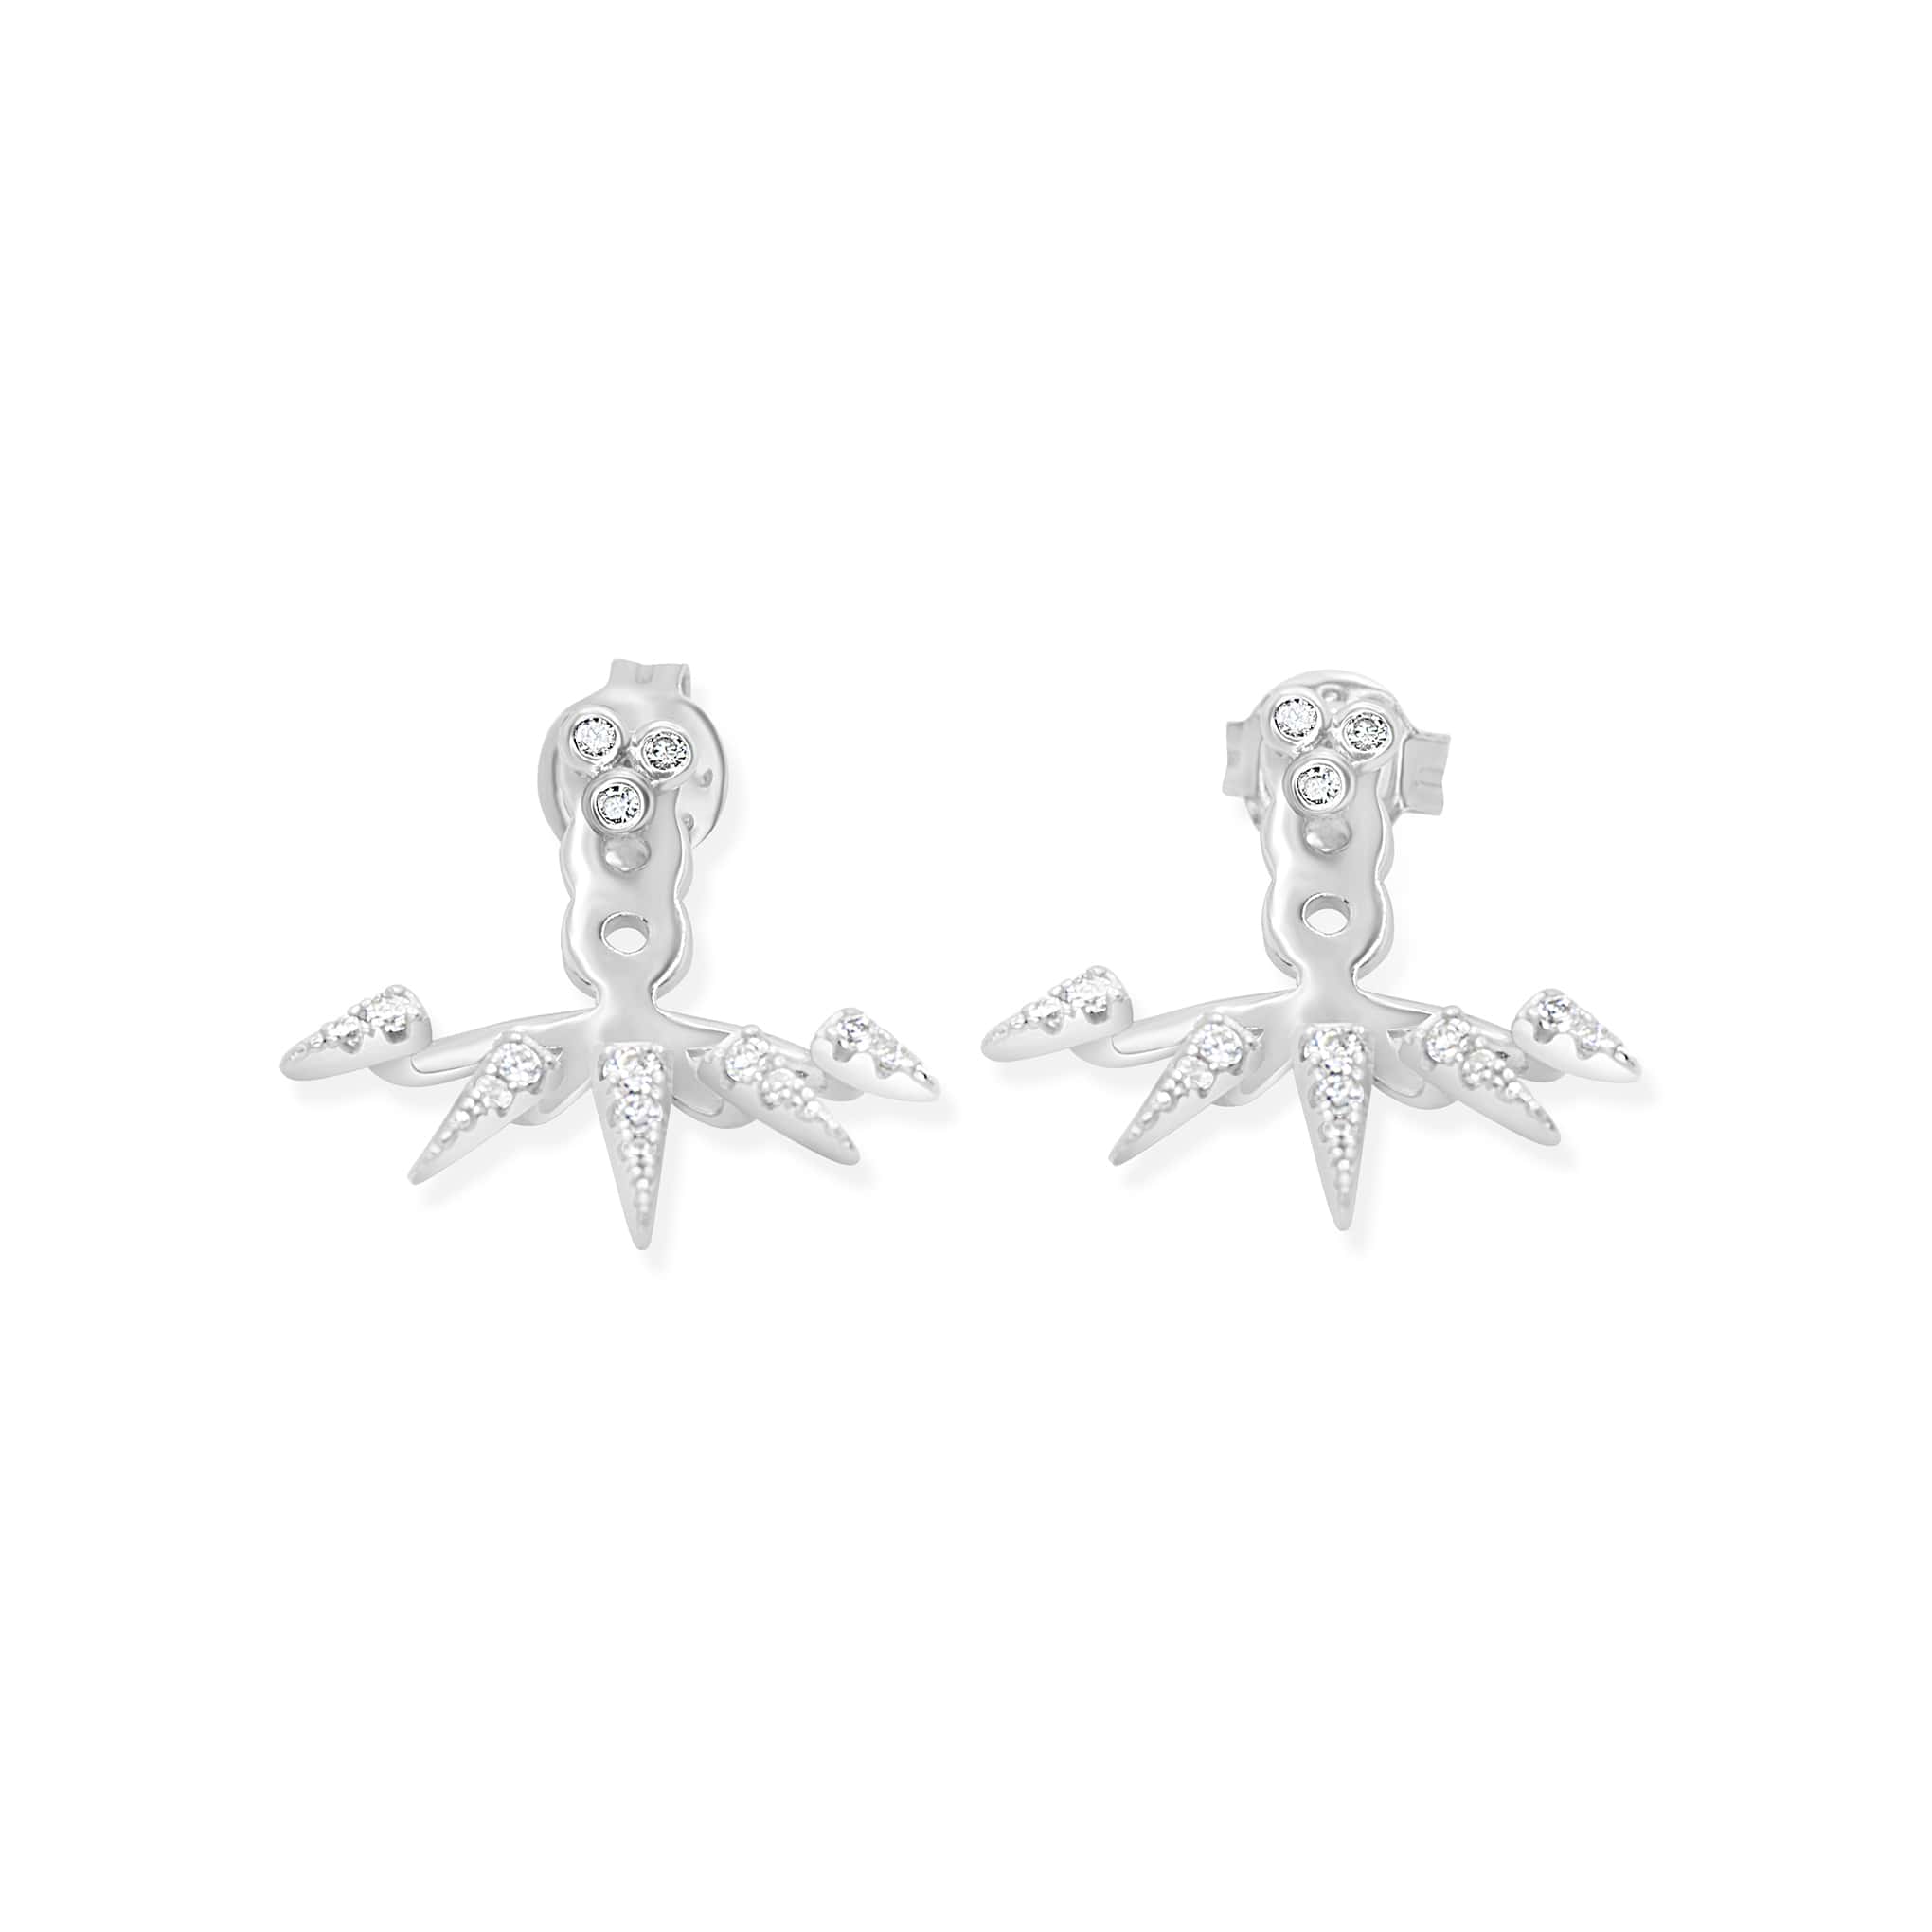 Silver Cubic Zirconia Earrings Featuring Decorative Cuff